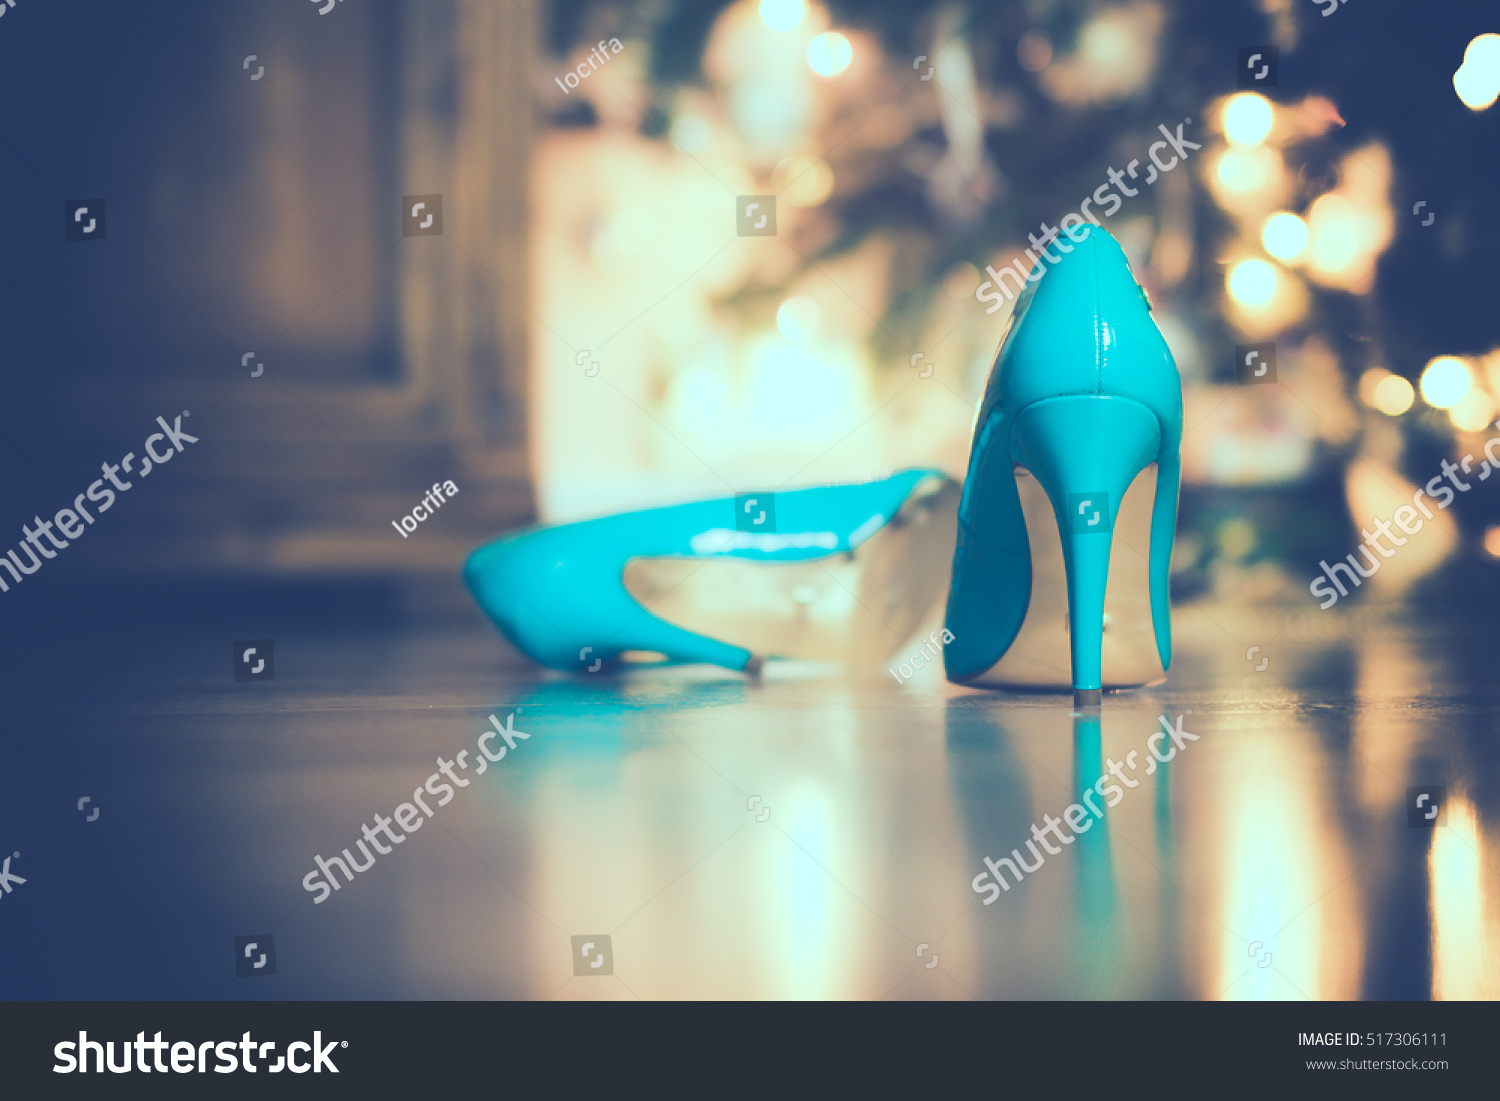 turquoise bottom shoes